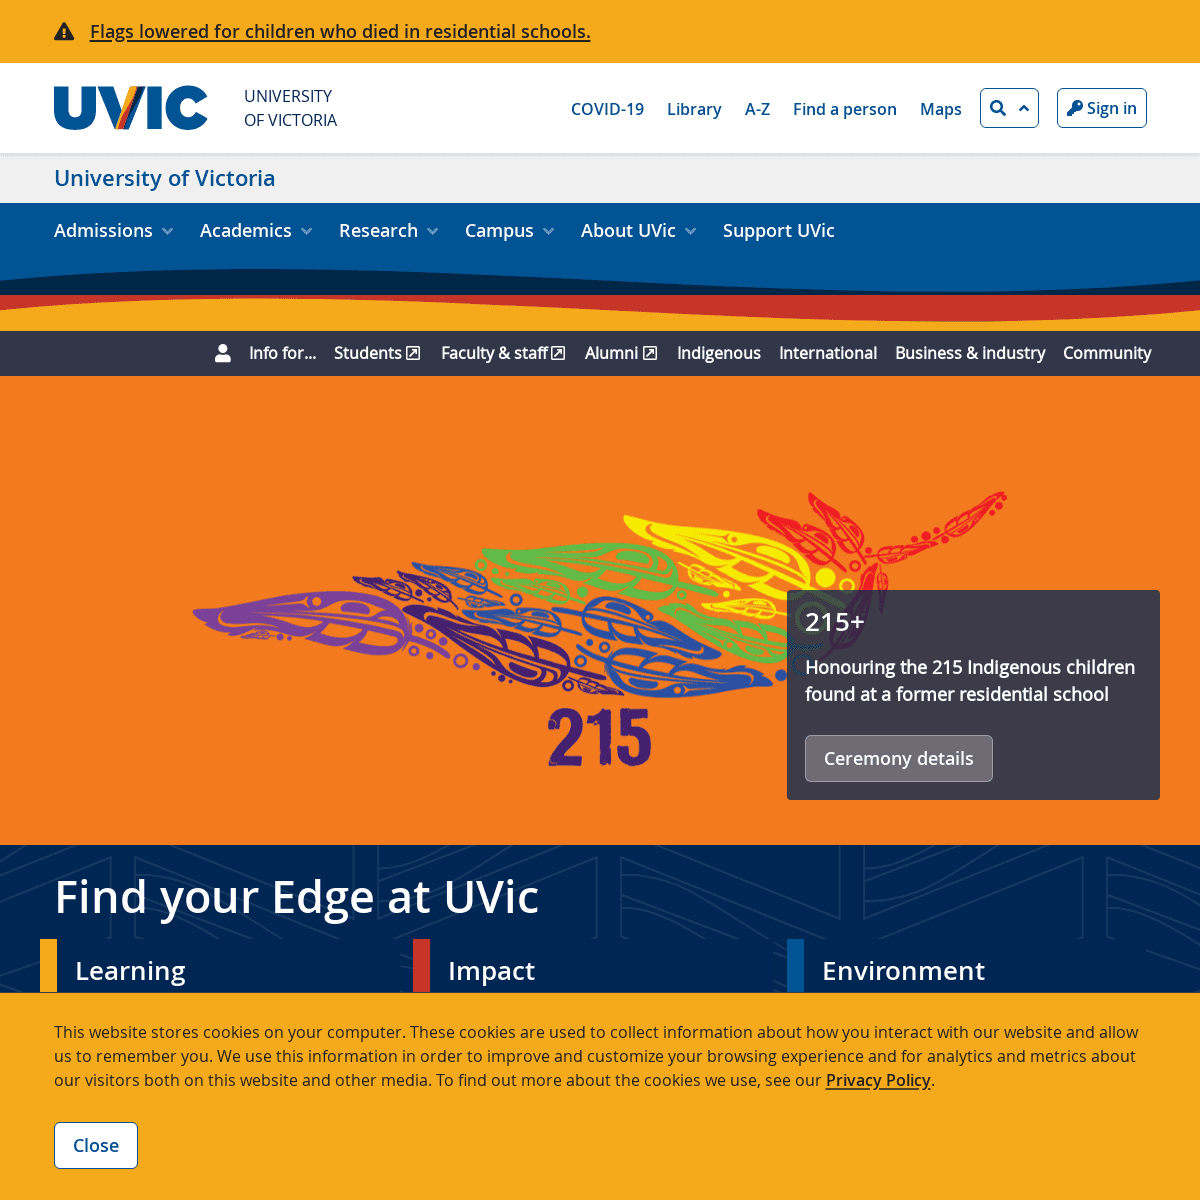 A complete backup of https://uvic.ca